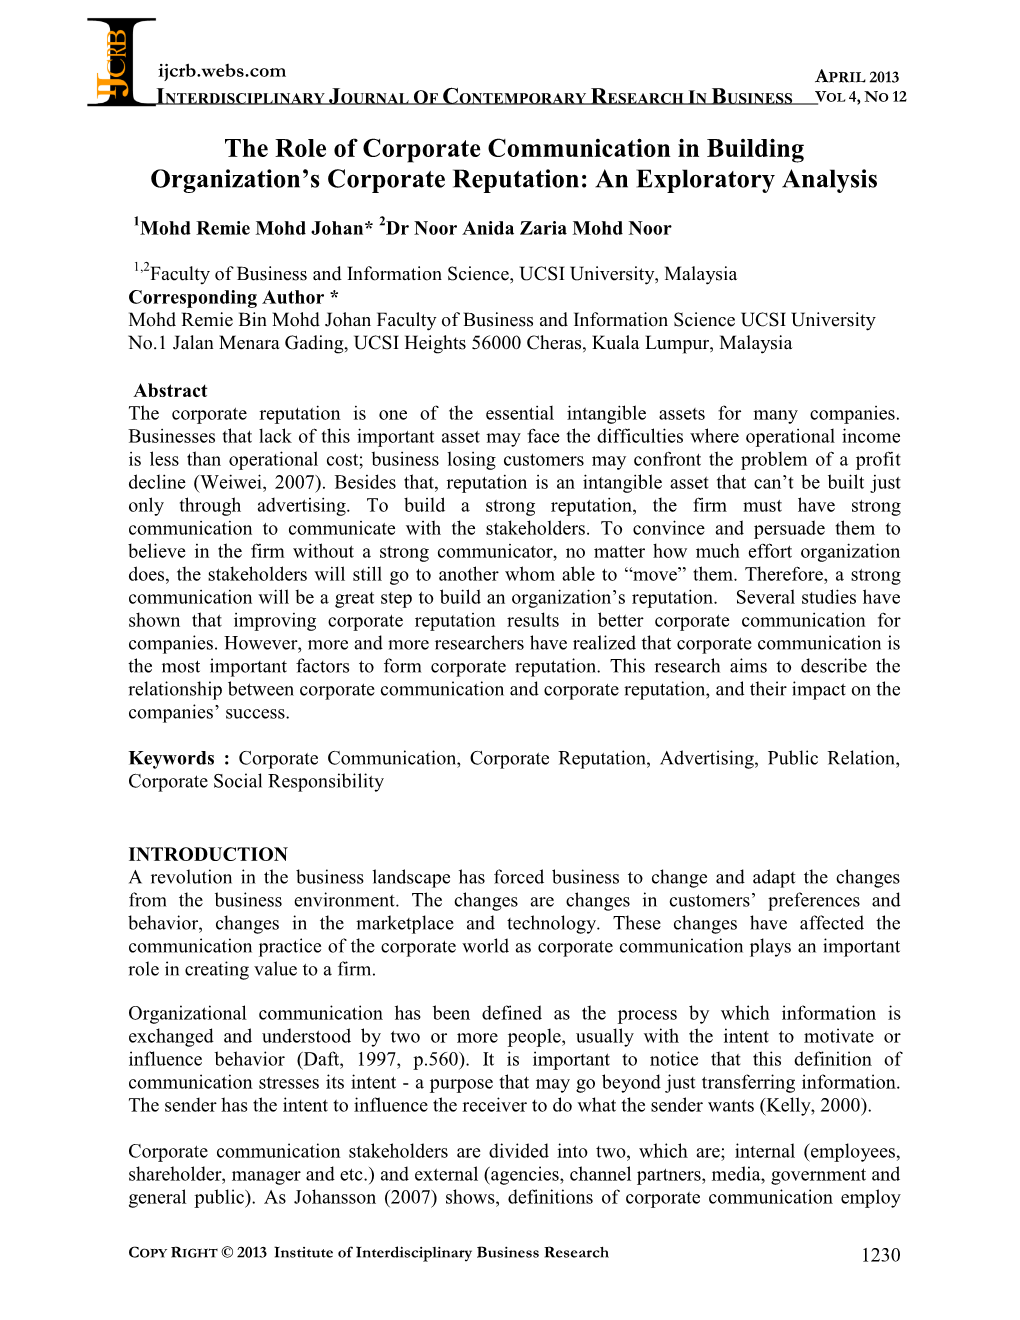 The Role of Corporate Communication in Building Organization’S Corporate Reputation: an Exploratory Analysis